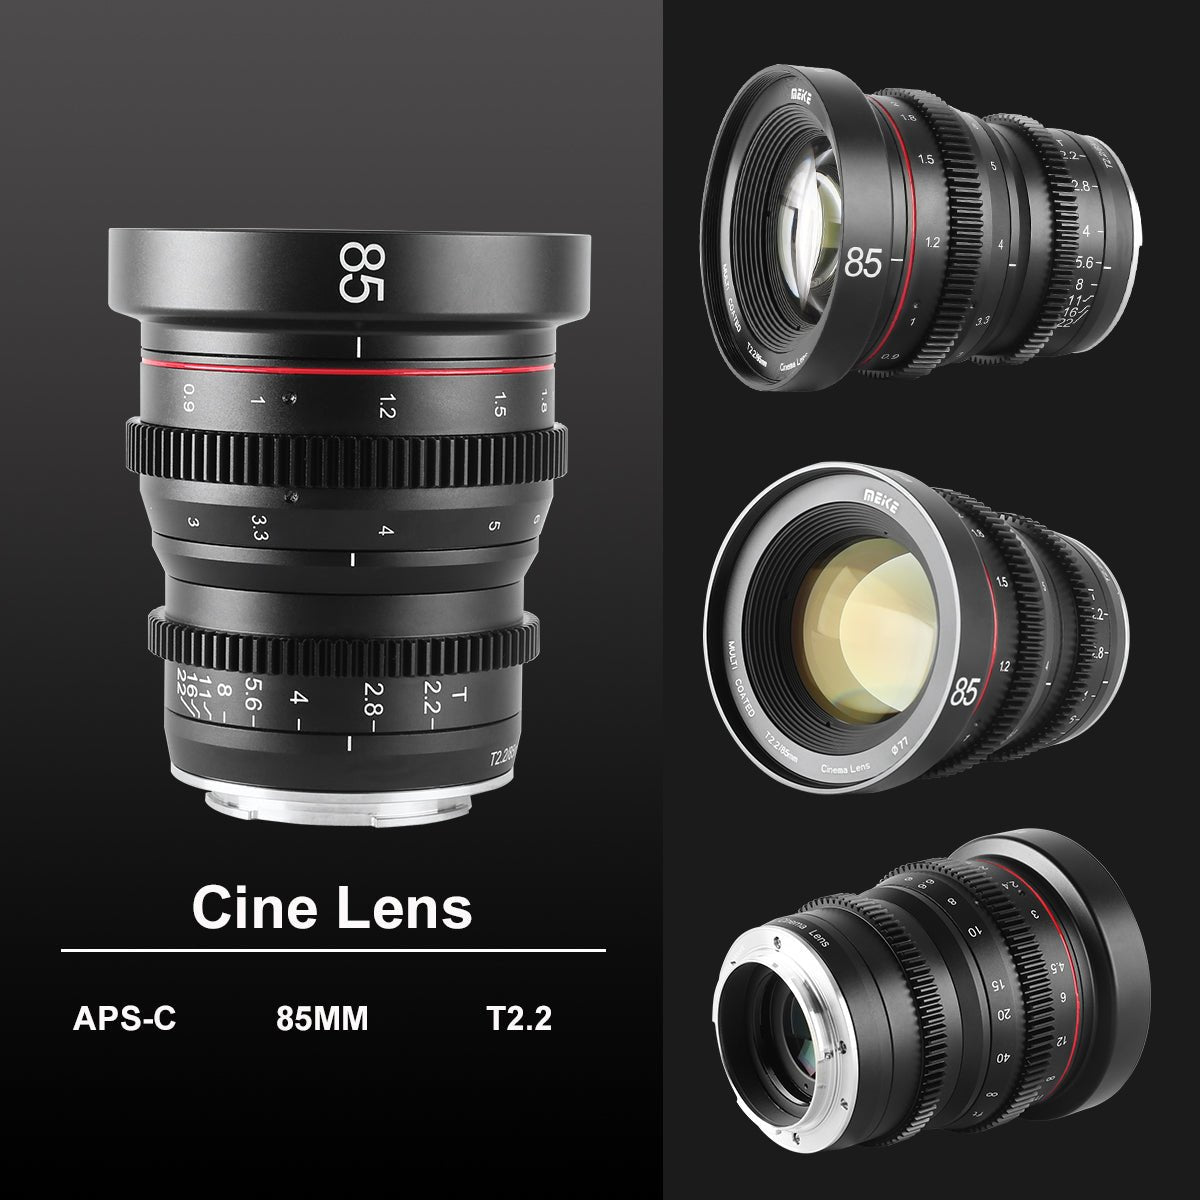 Meike Cinema Prime 85mm T2.2 Lens (Fujifilm X Mount) in Different Perspectives